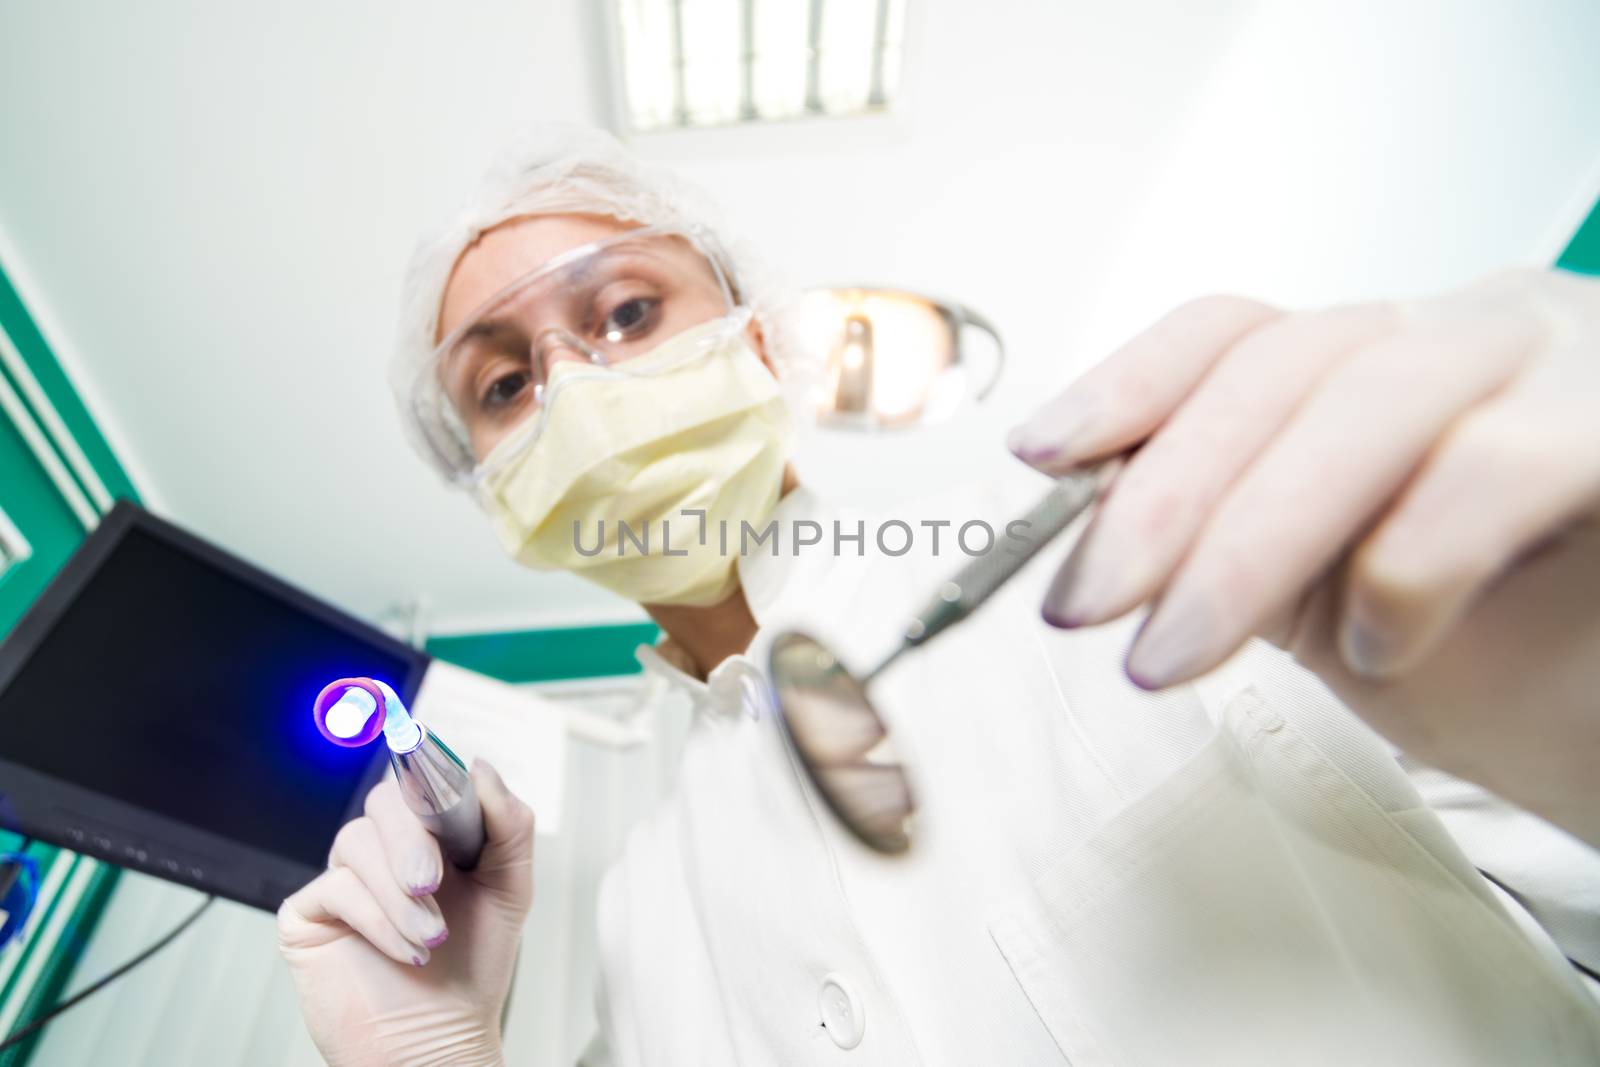 Dentist Working From Perspective Of Patient by MilanMarkovic78